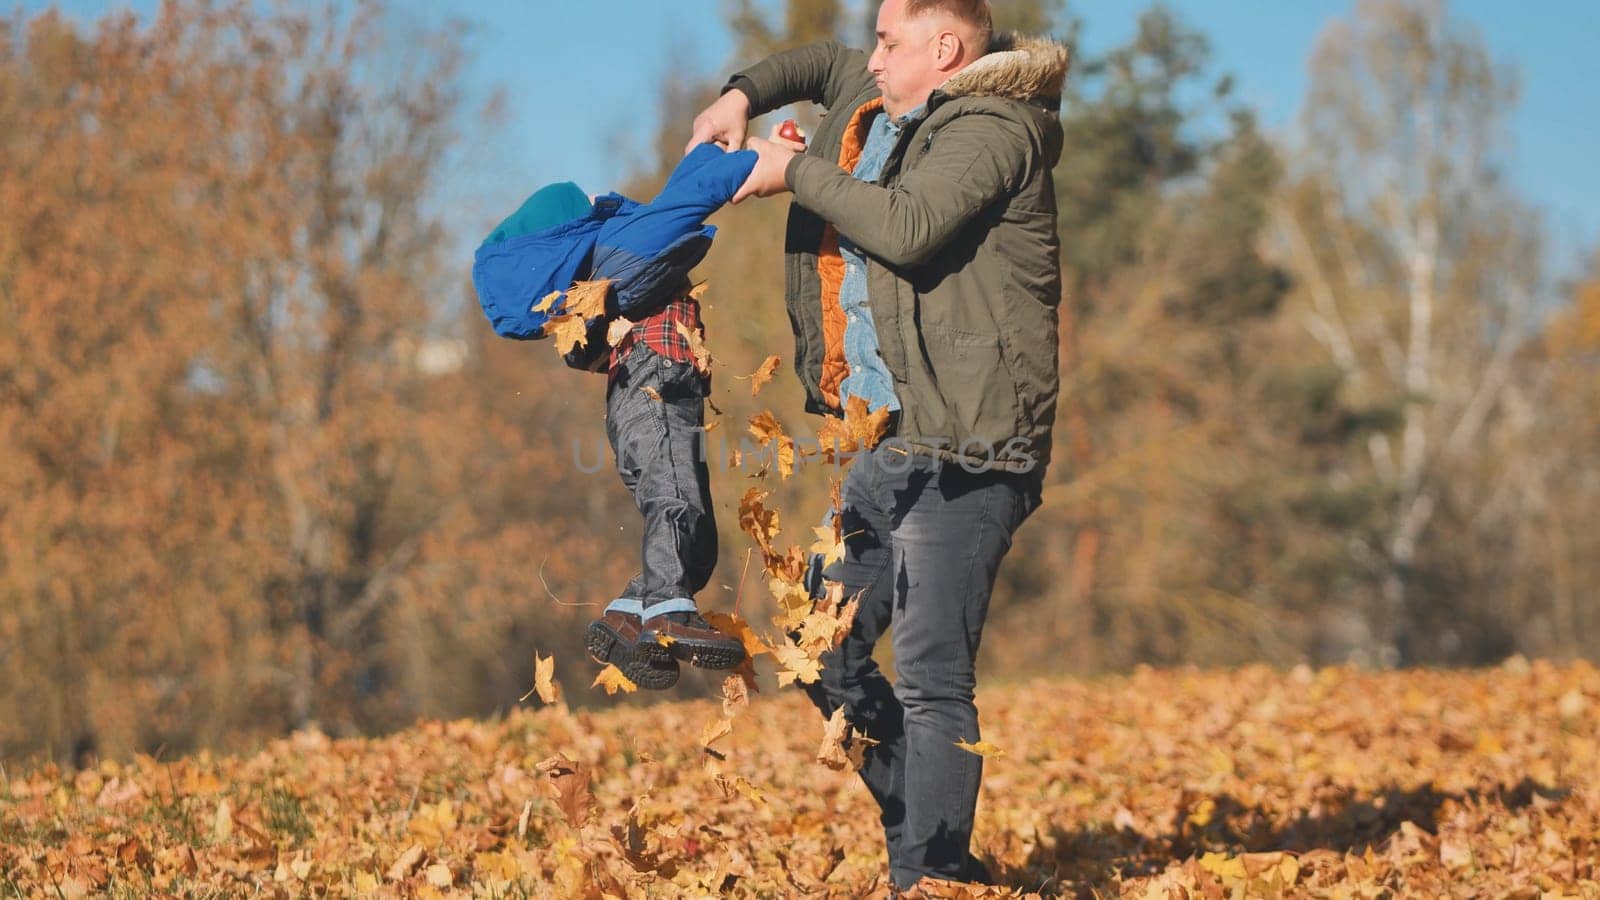 A father spins his son by his feet in the park in the fall